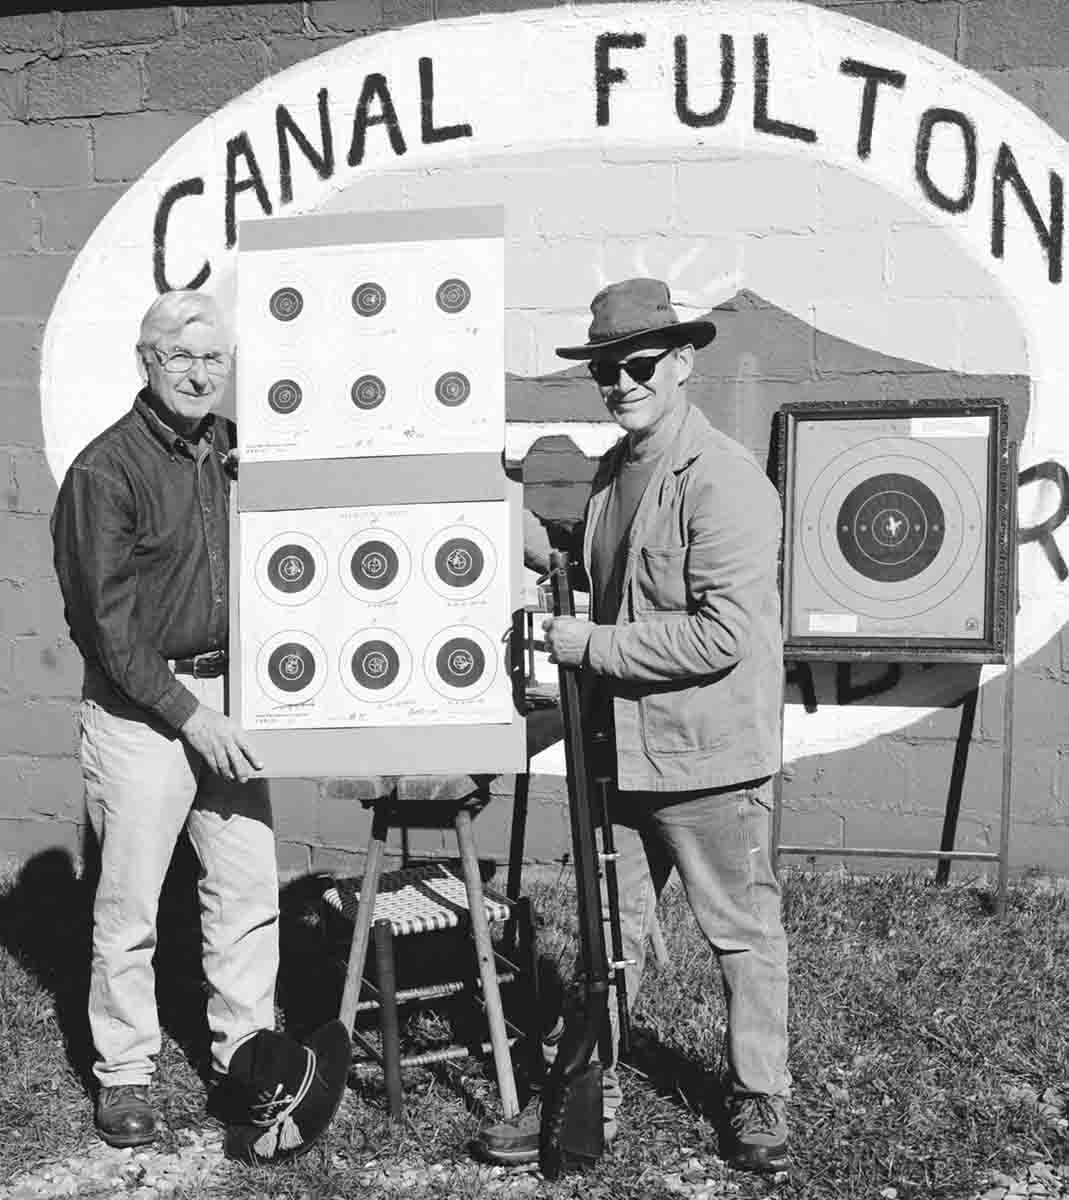 Bob Dickson on left, with his winning targets shot with “Old Harrison.” Mark Barnhill with Old Harrison on right, at the Rich Hicks Memorial Match at the Canal Fulton Ramrod Club.